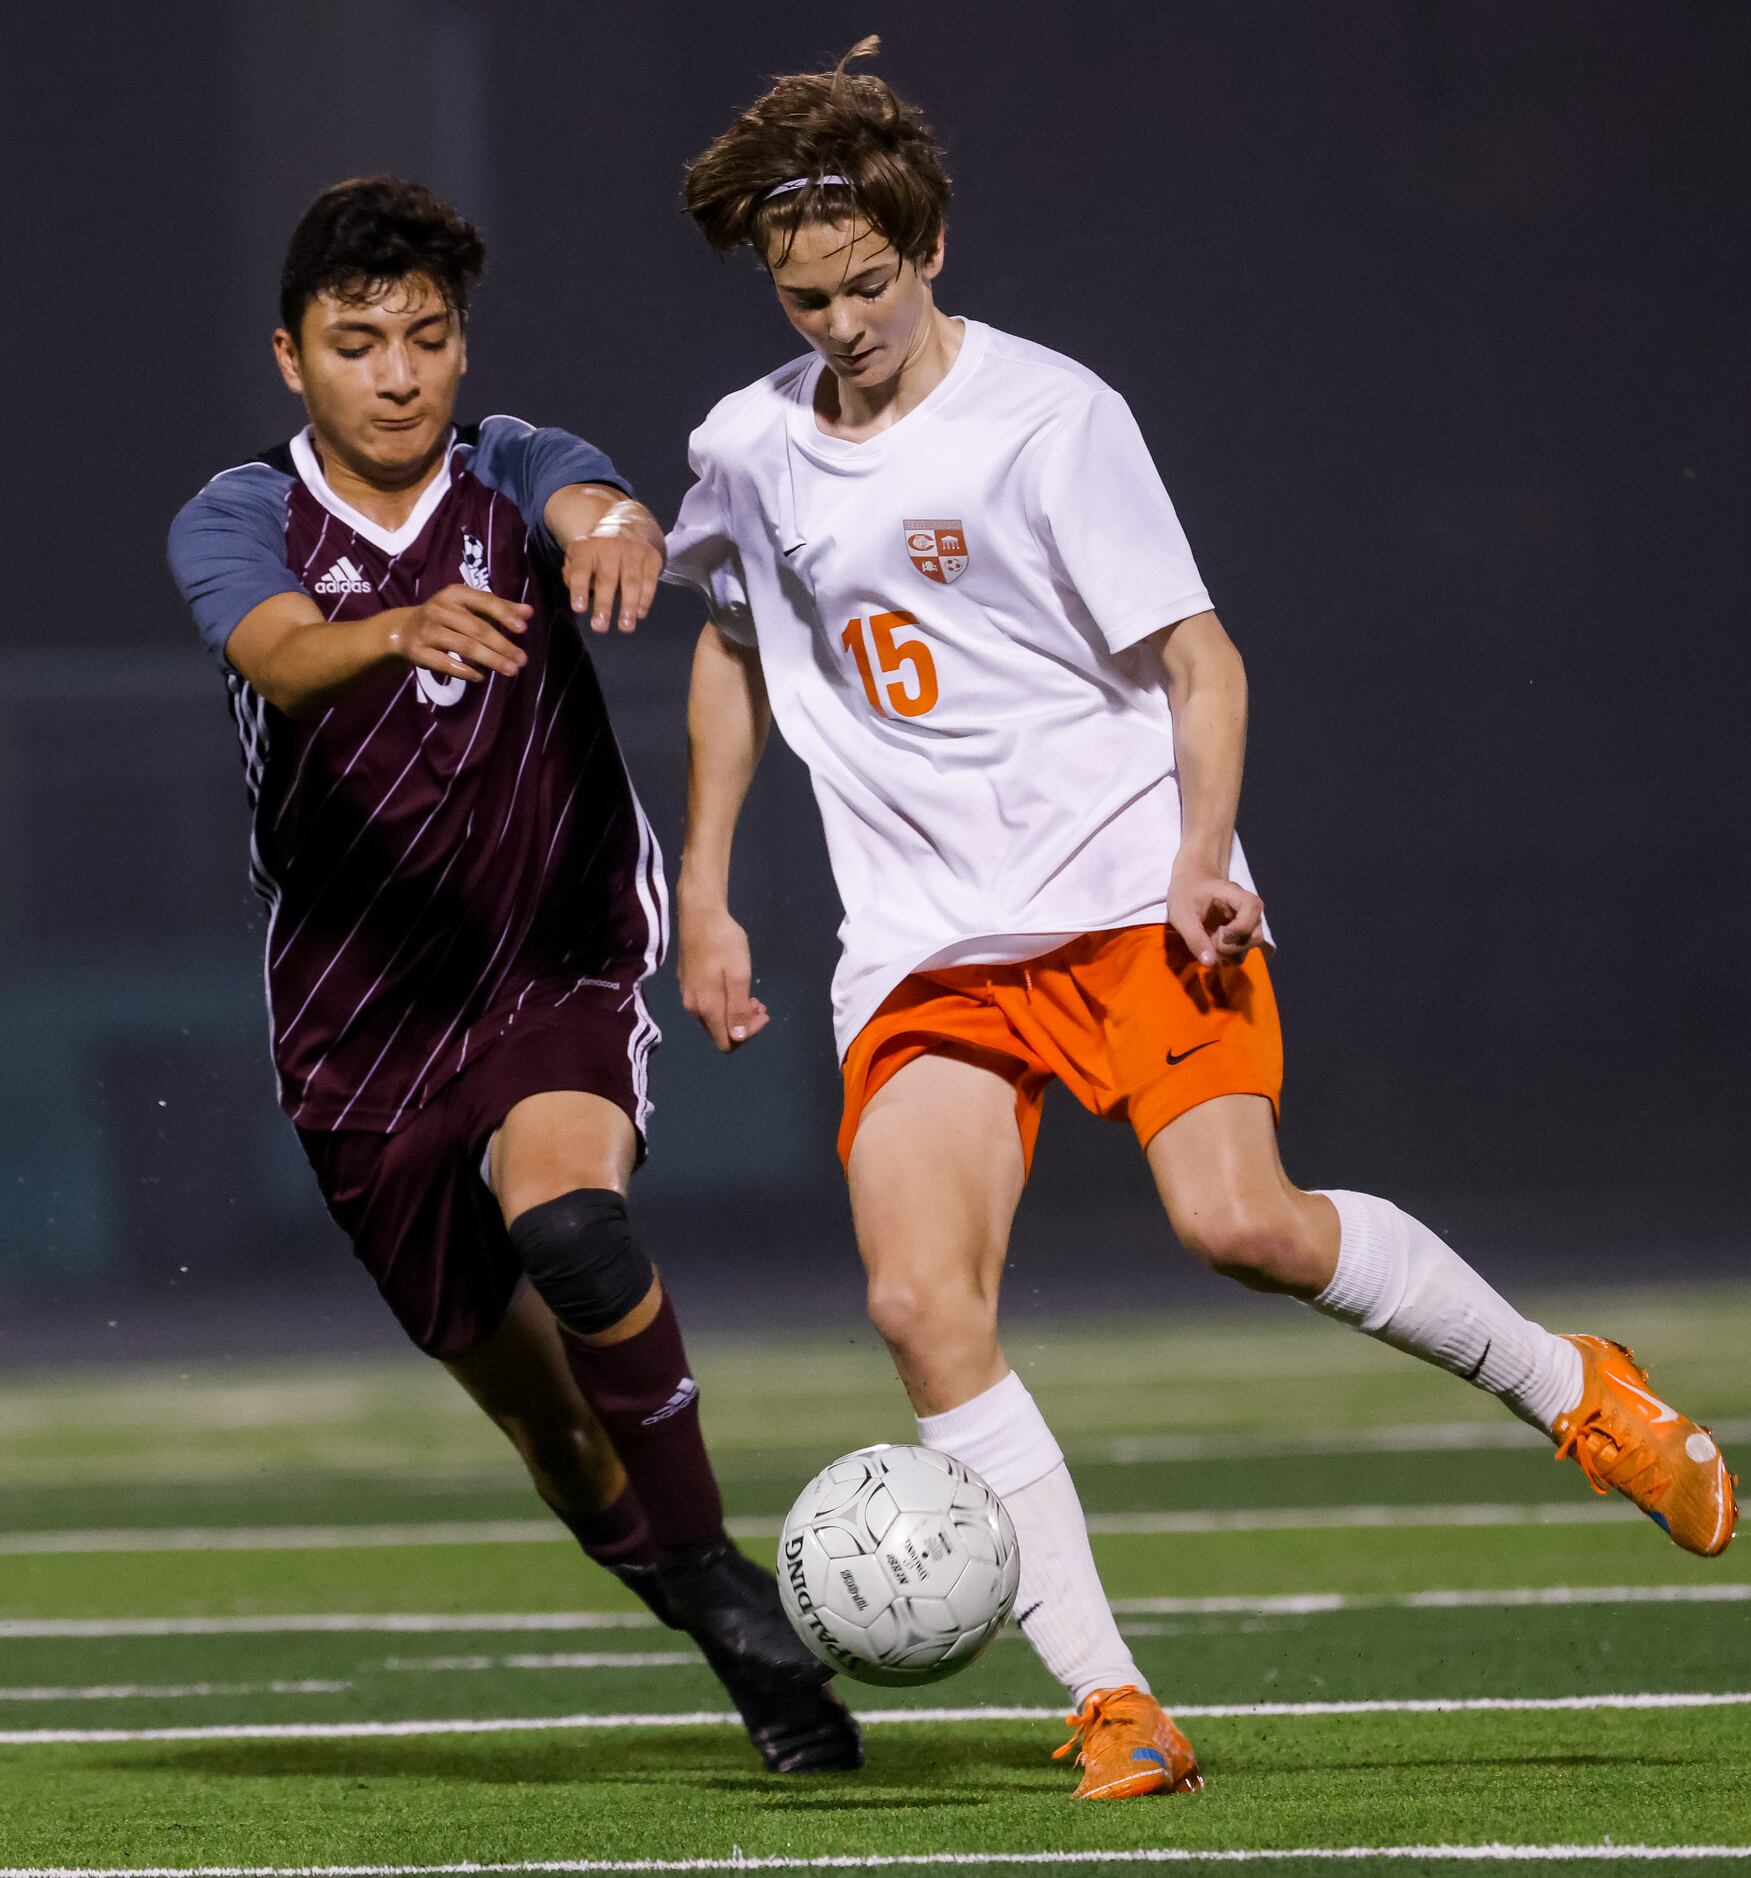 Celina's Hank Melton (15) and Palestine's Arturo Nieto (10) battle for the ball during the...